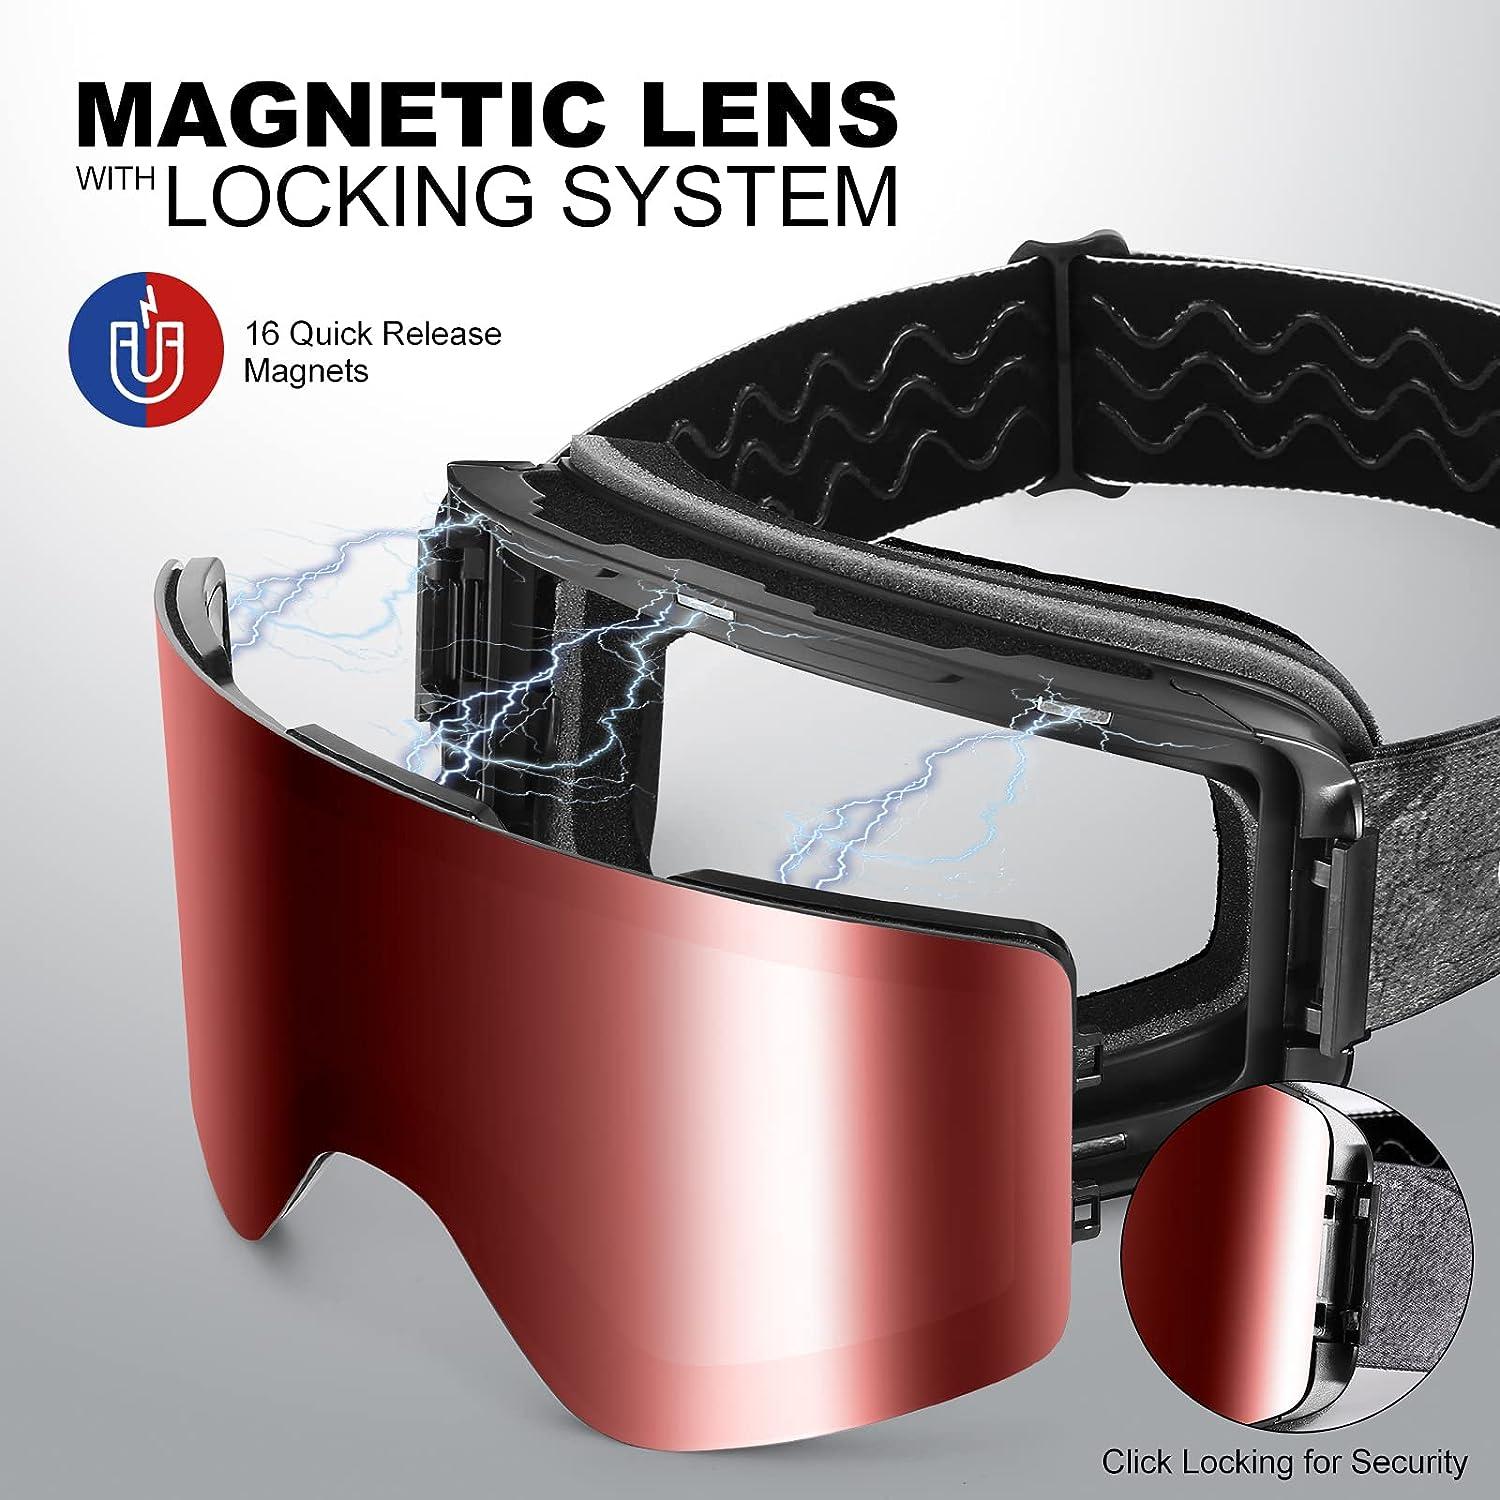 Interchangeable Goggle Straps